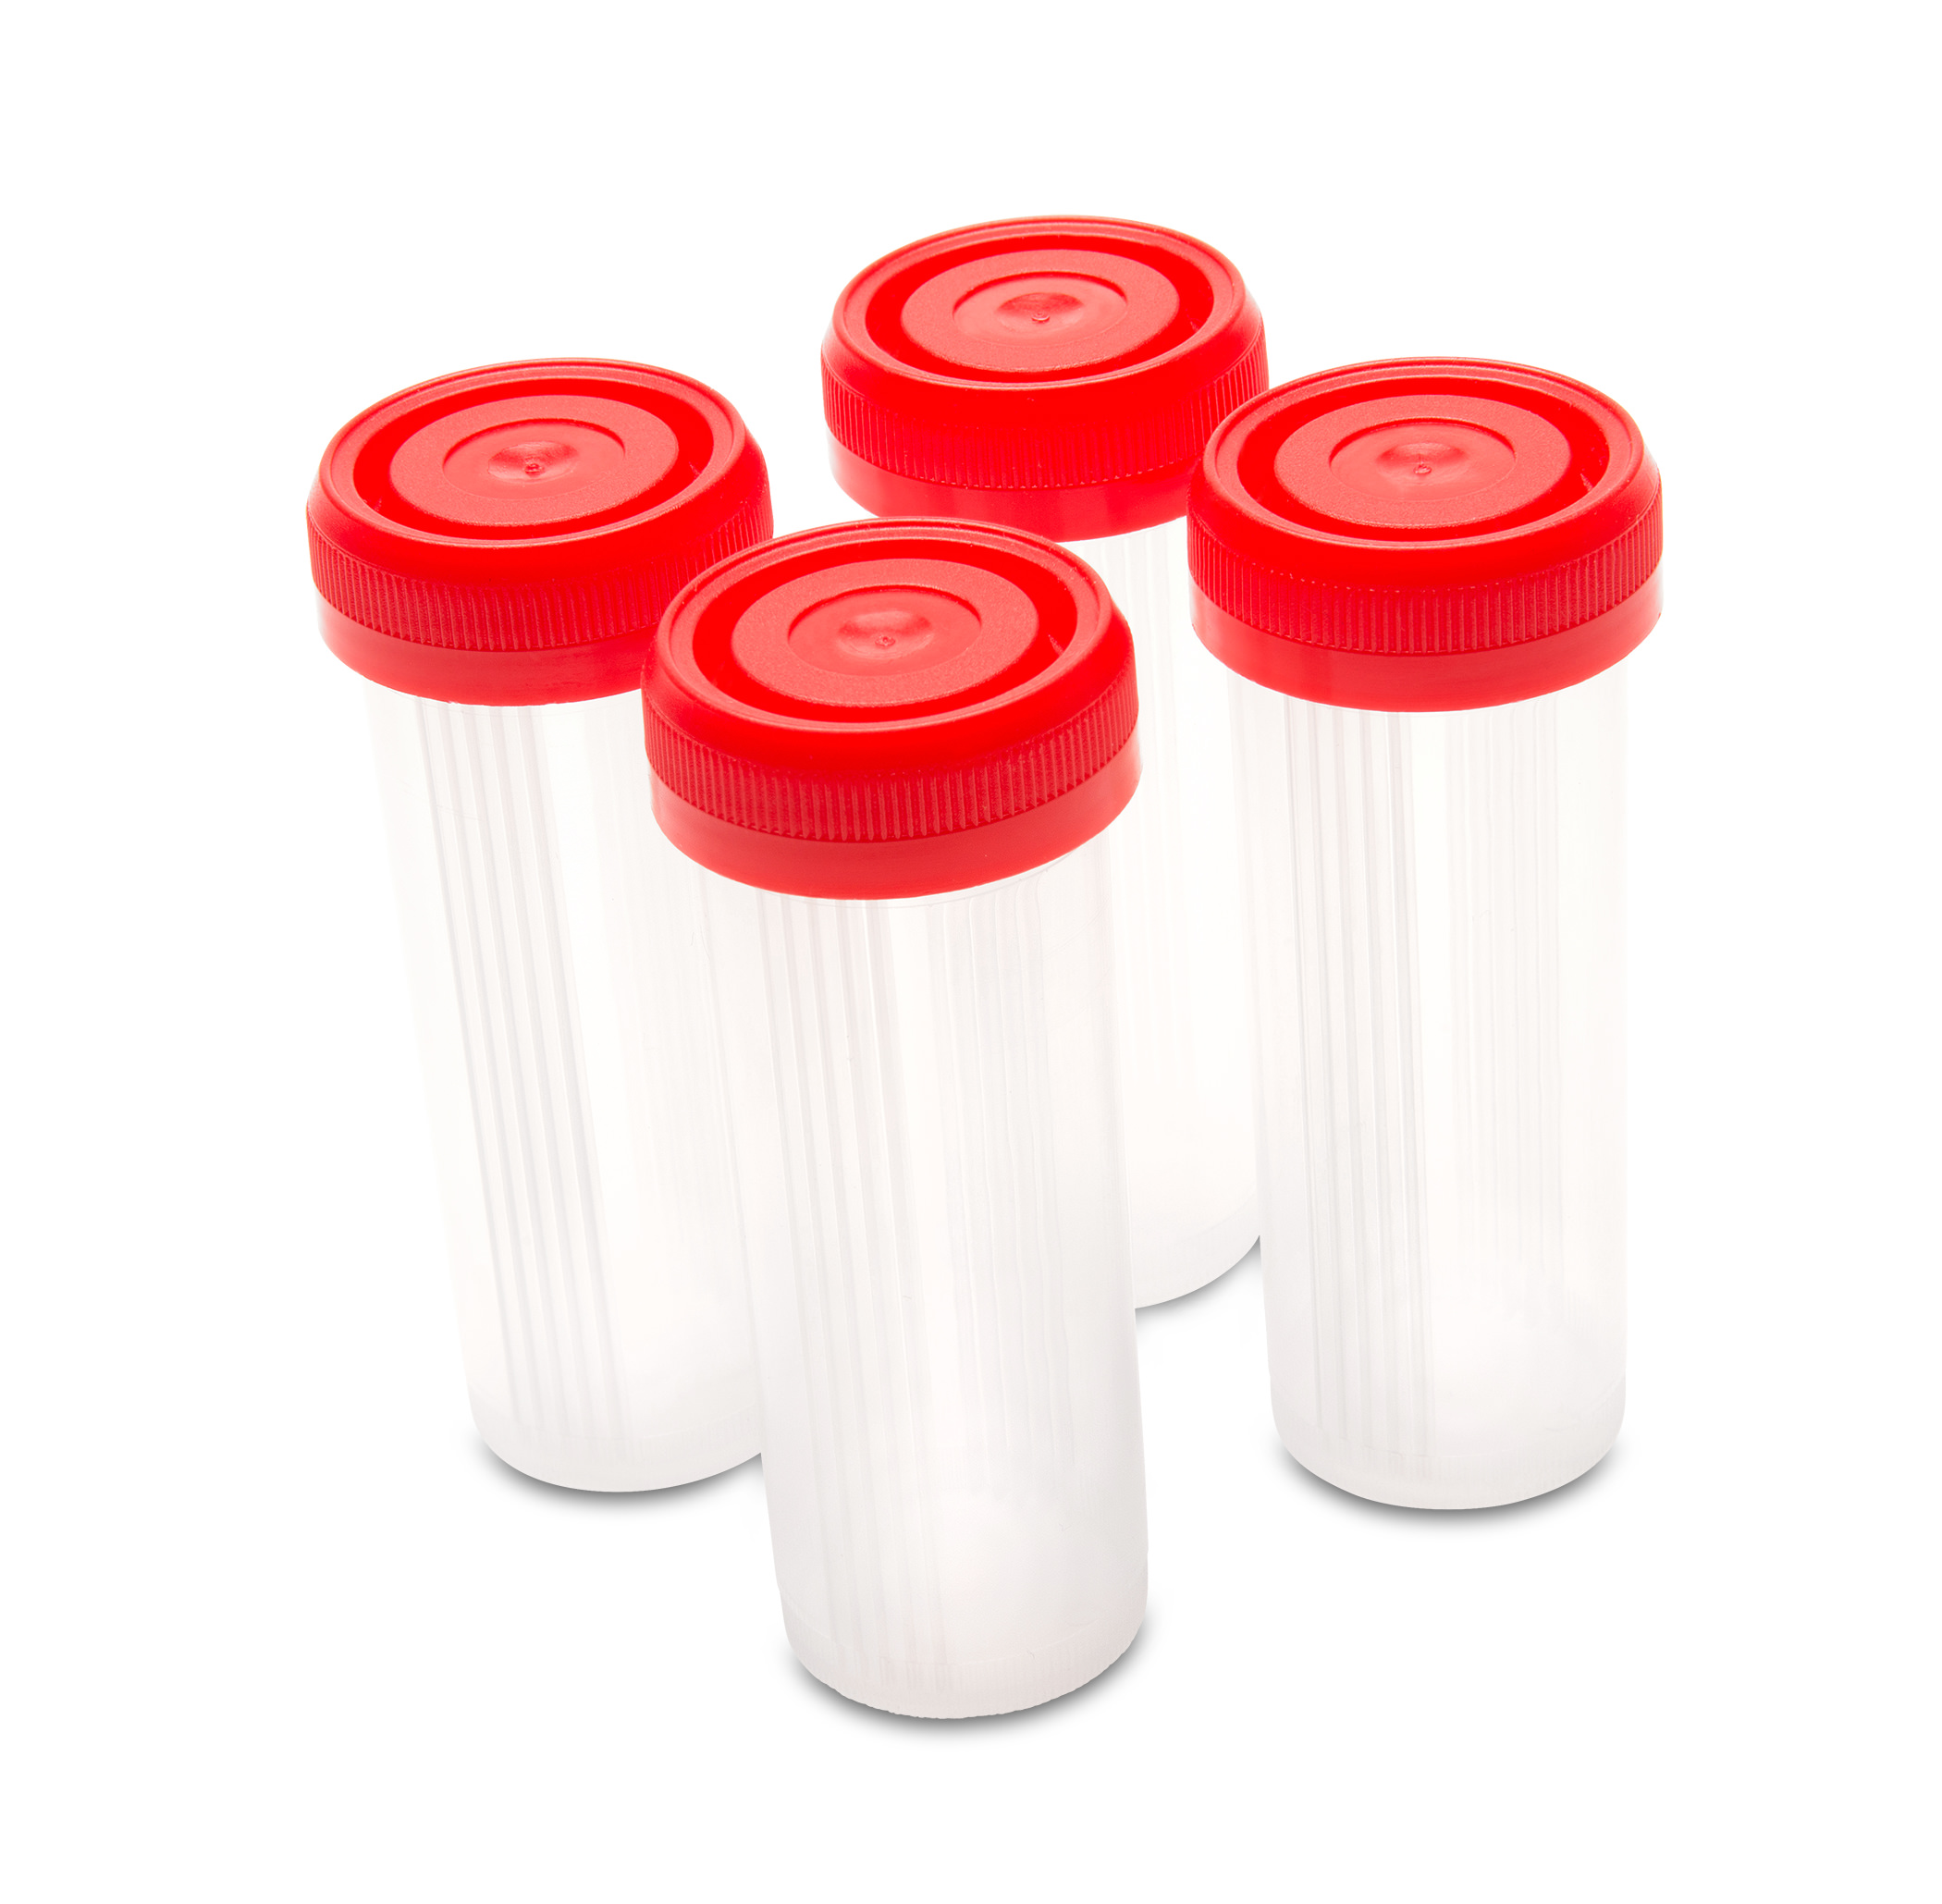 ProteinSimple scWest chip canisters (4 pack) for Single-Cell Western